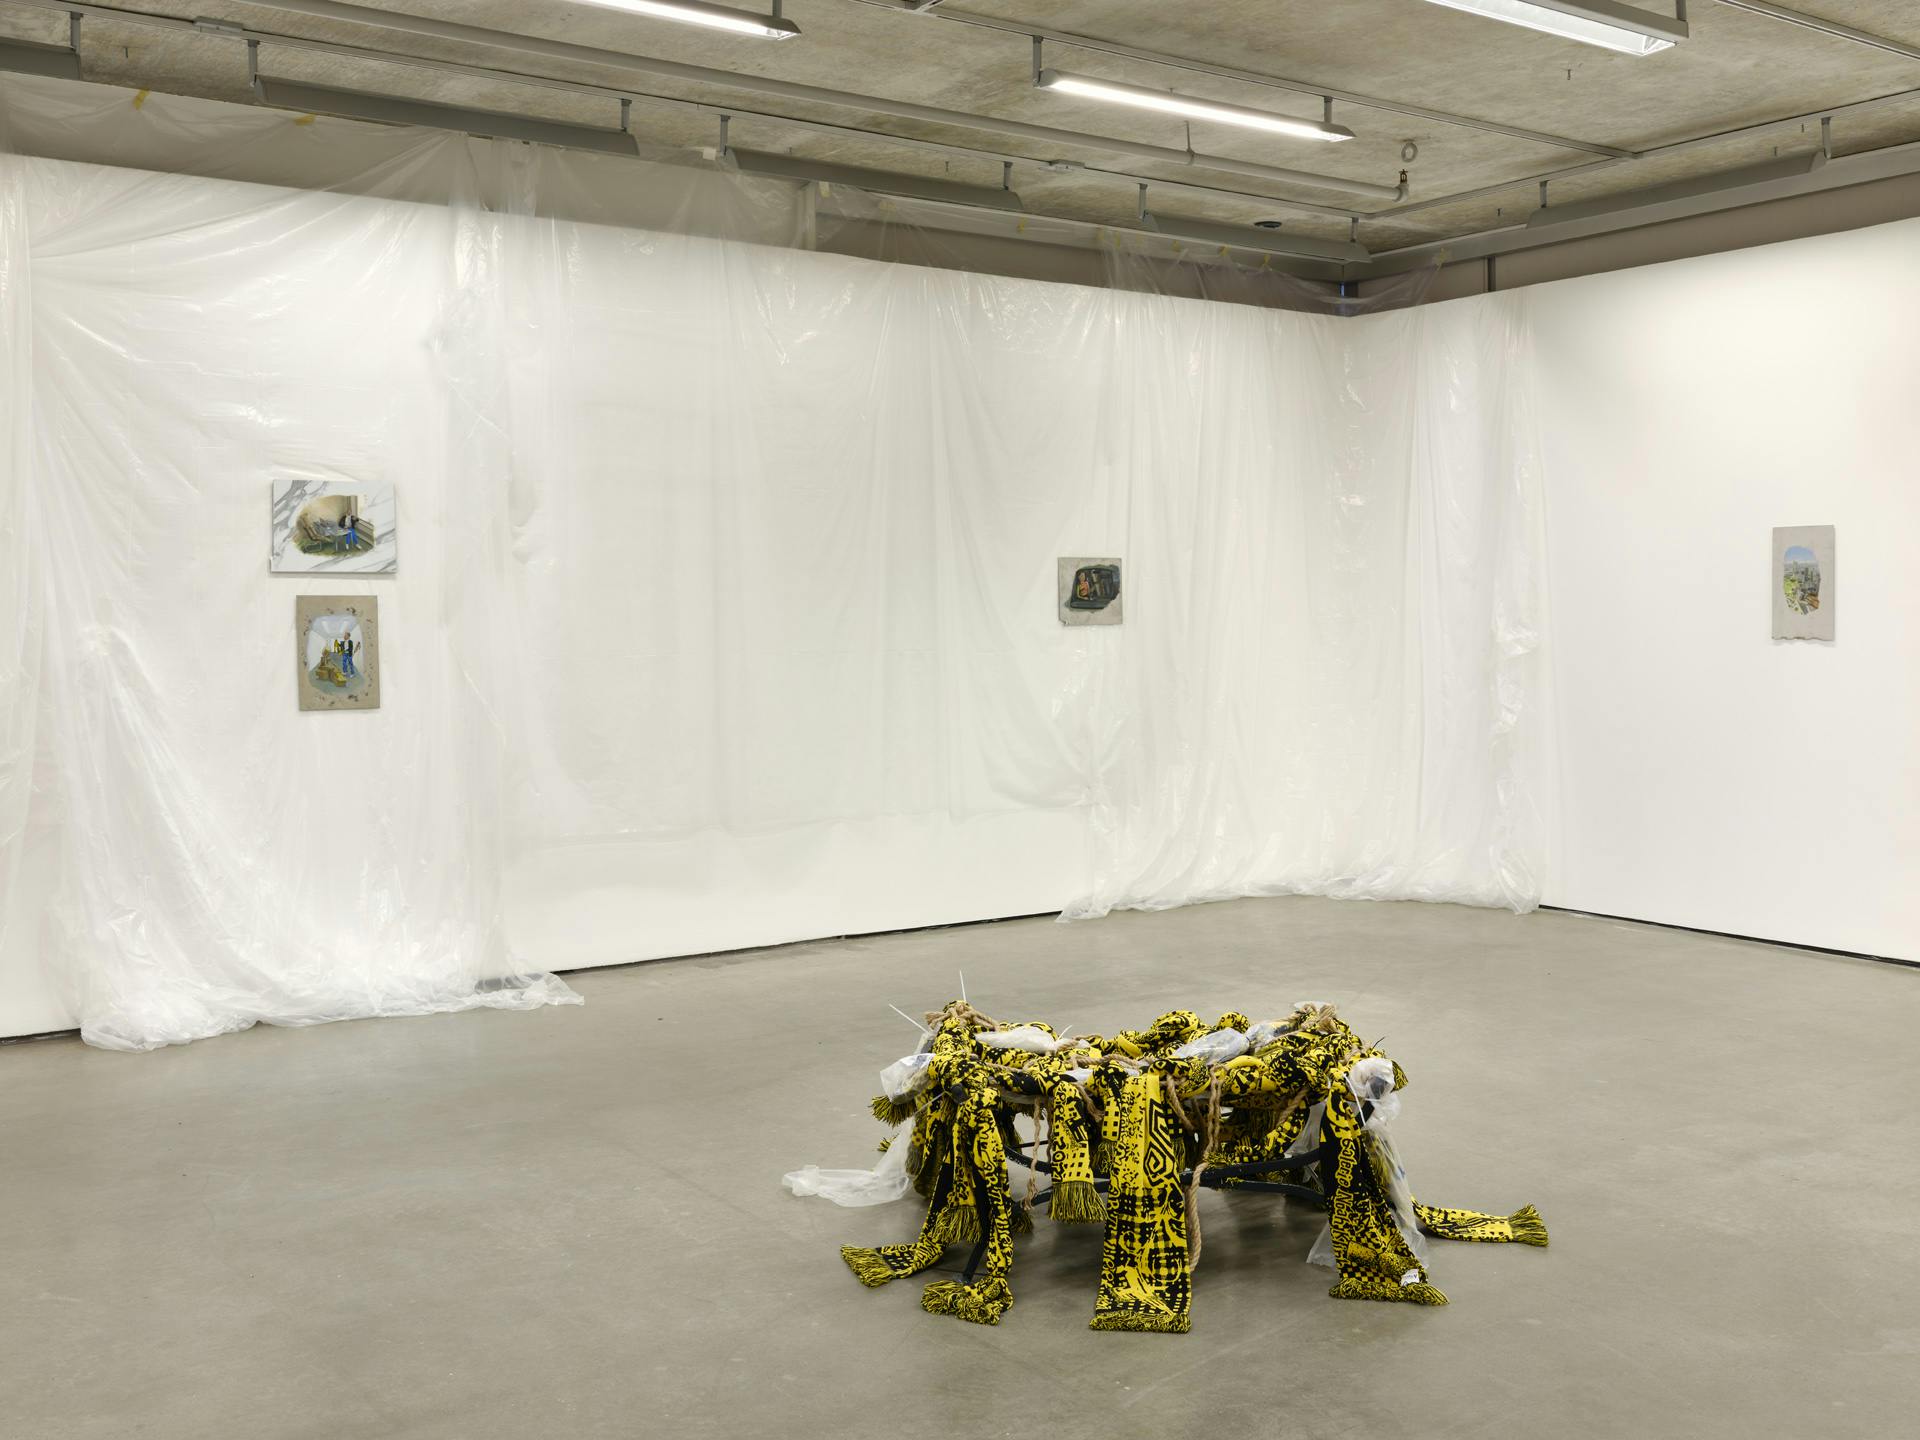 Four small paintings on faux-marble tiles or metal sheets hang on gallery walls draped with translucent plastic sheets. A sculpture made of yellow textiles, plastic and rope sits on the floor. 